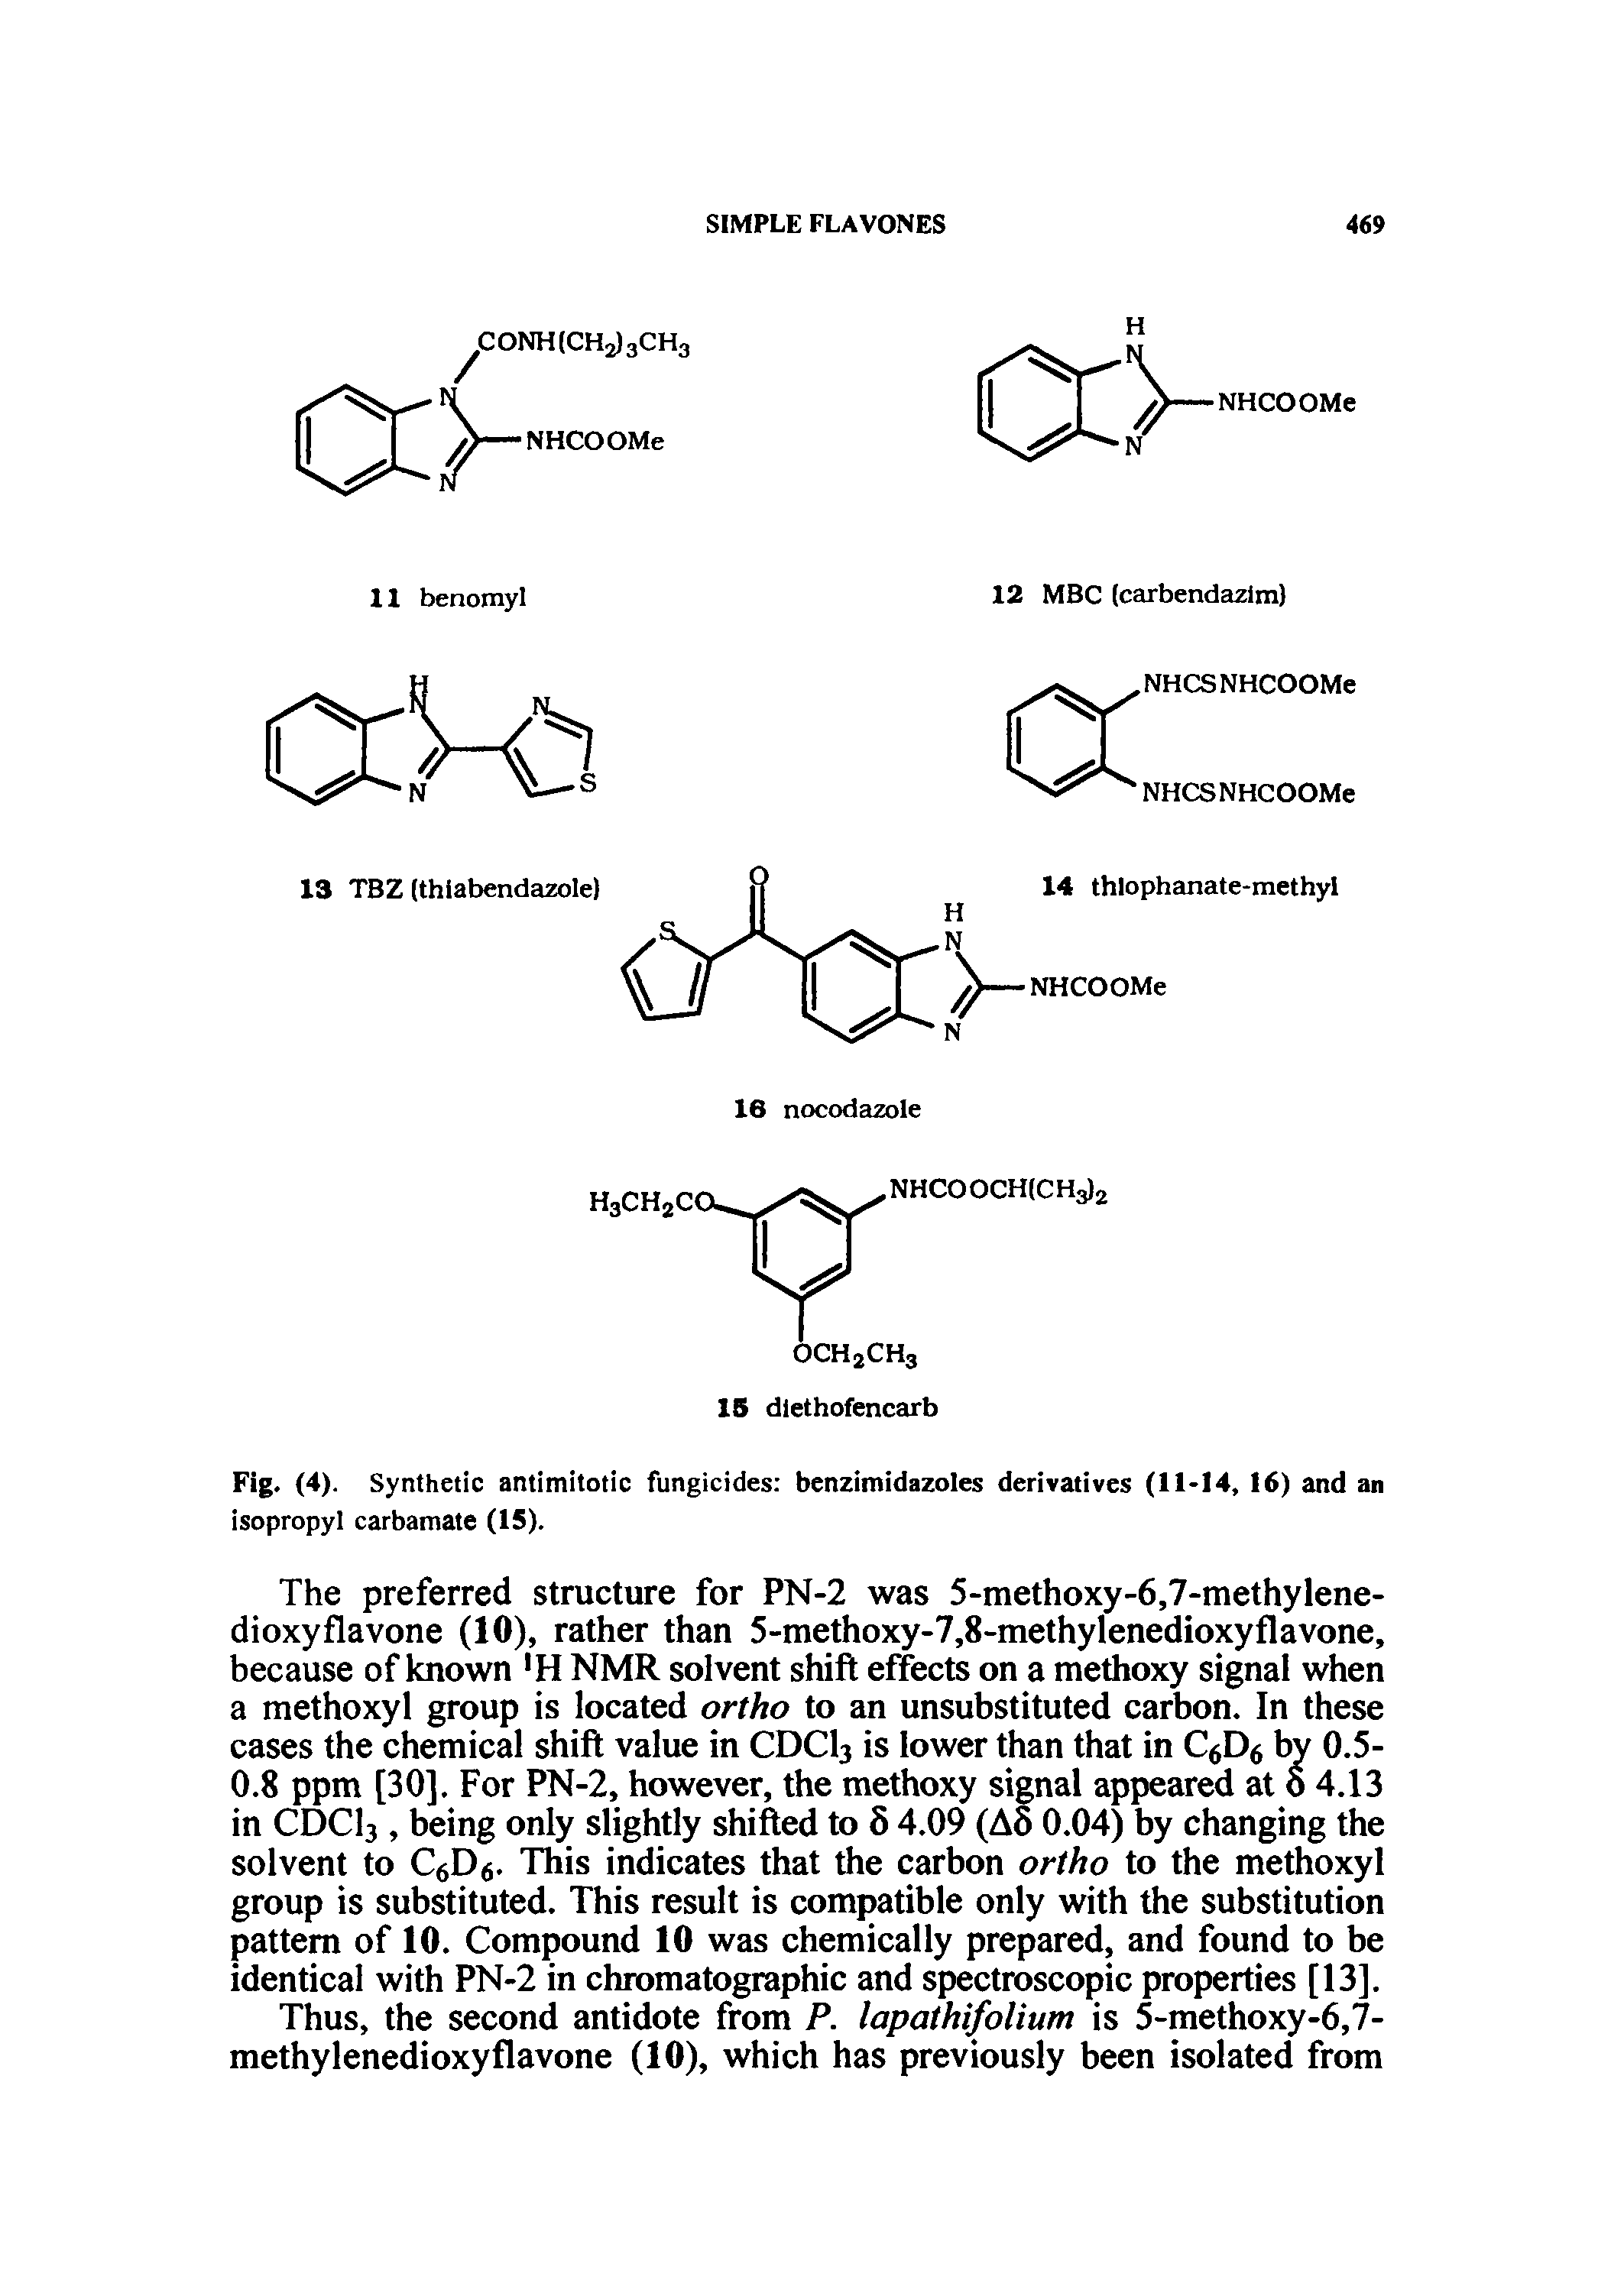 Fig. (4). Synthetic antimitotic fungicides benzimidazoles derivatives (11-14, 16) and an isopropyl carbamate (15).